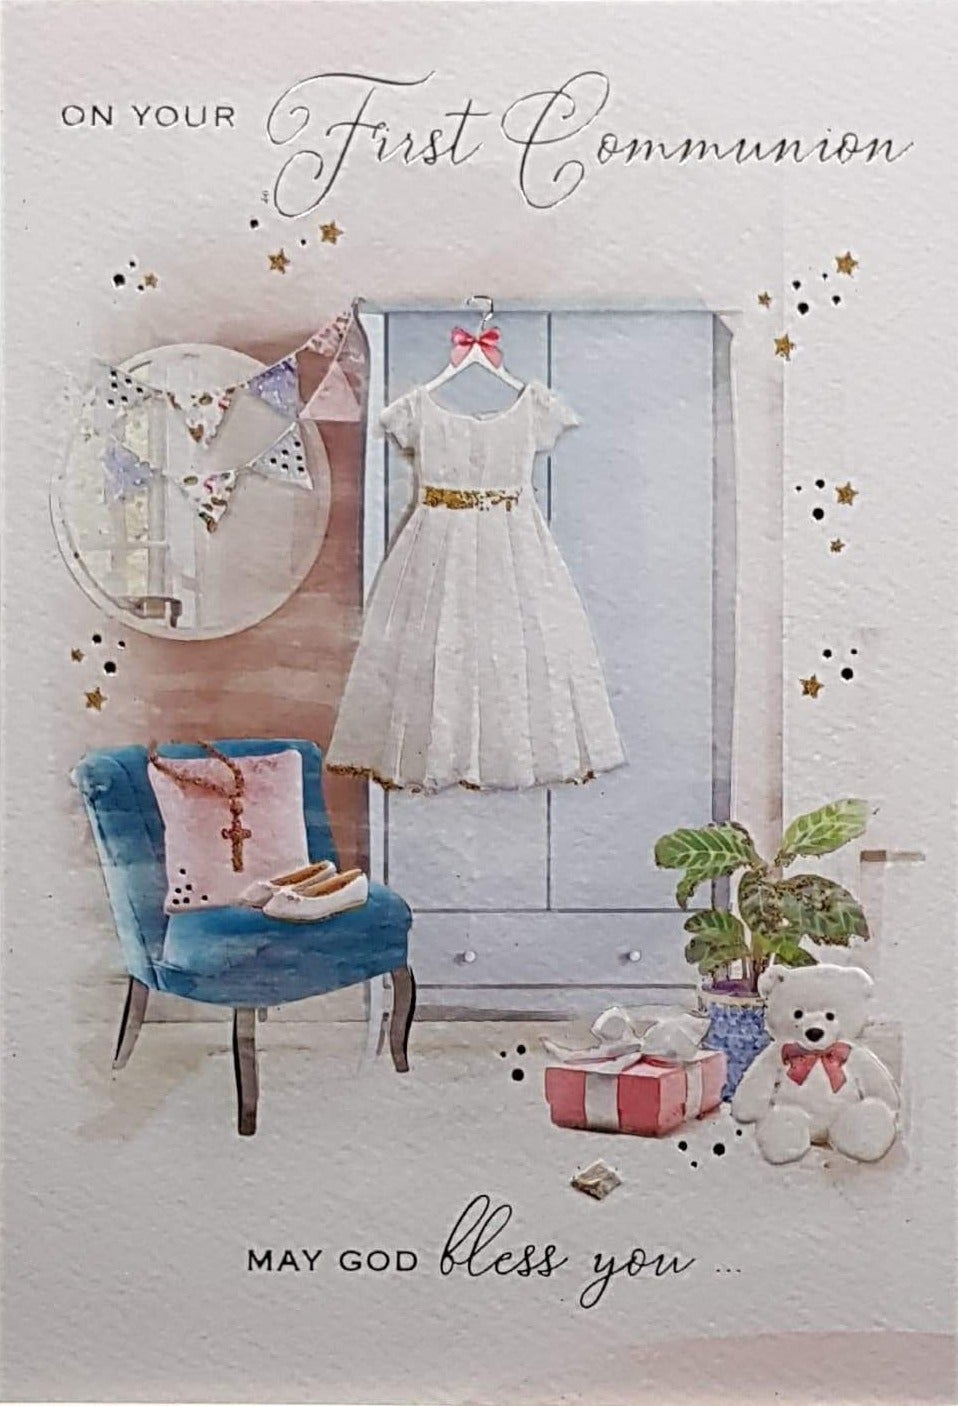 Communion Card - Girl - On Your First Communion & White Dress Hanging on Wardrobe